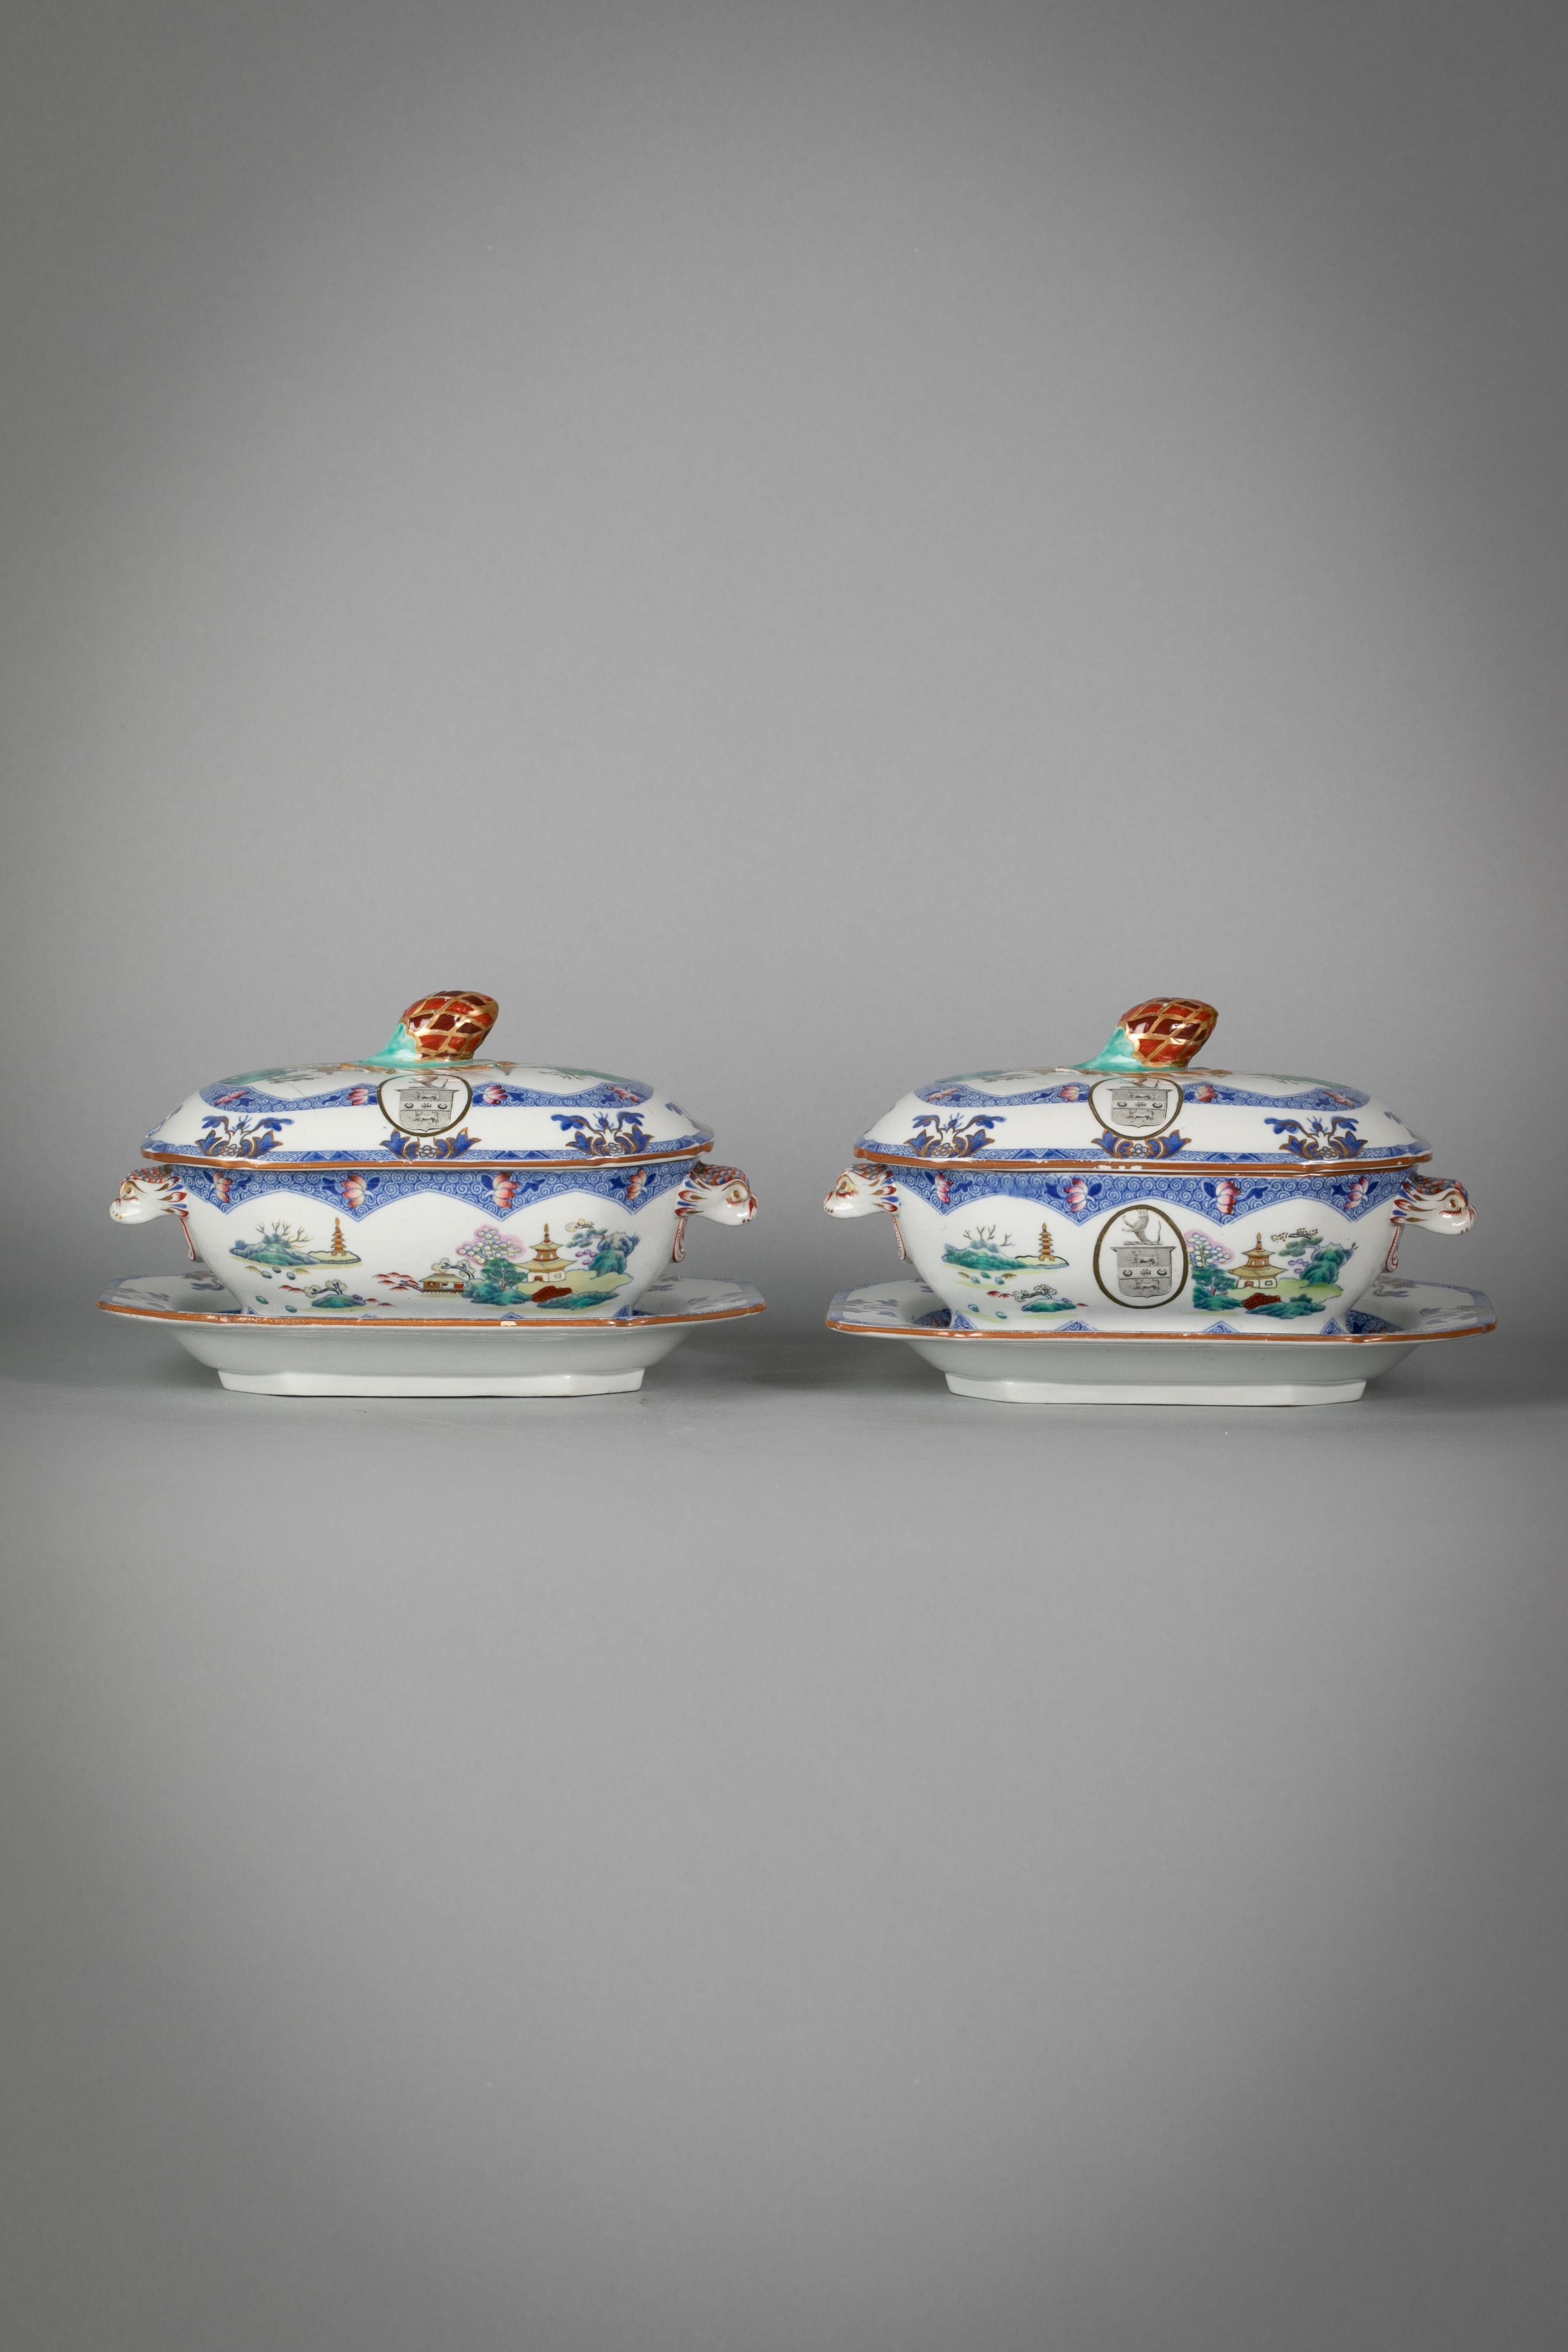 Early 19th Century Spode Ironstone Crested Part Dinner Service, circa 1815